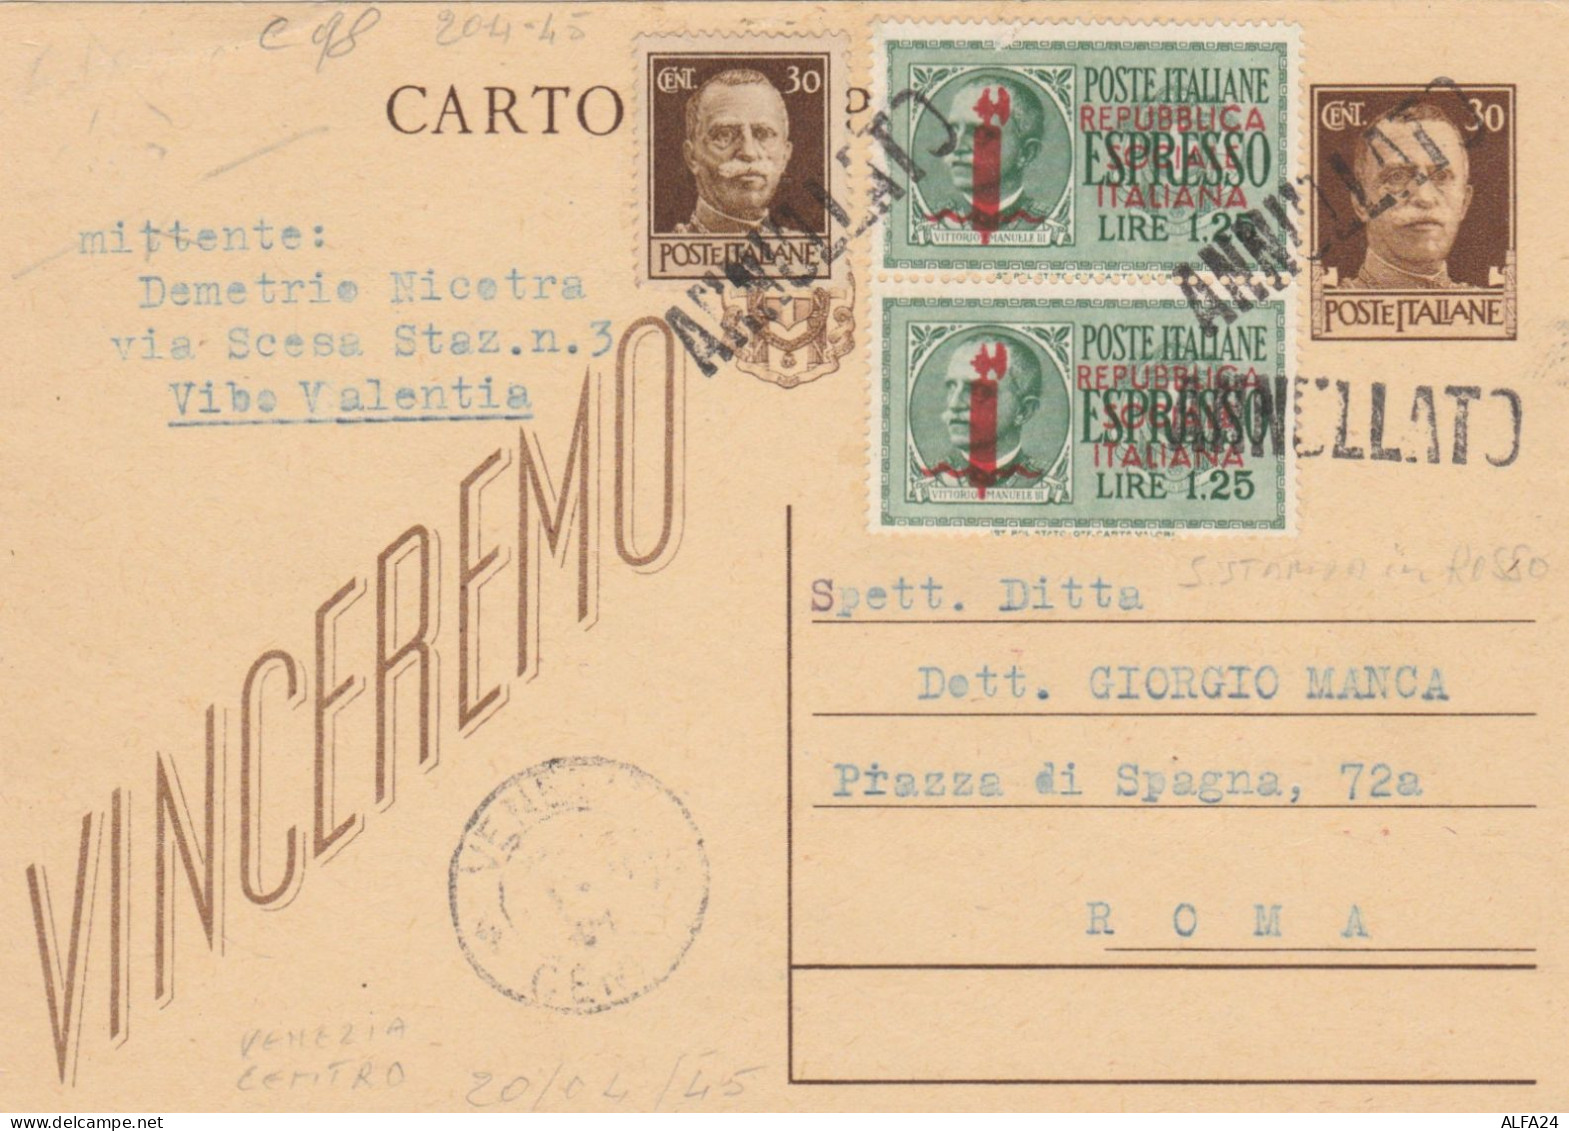 INTERO POSTALE C.30+30+2X1,25 SS RSI TIMBRO ANNULLATO 1945 (HC958 - Stamped Stationery